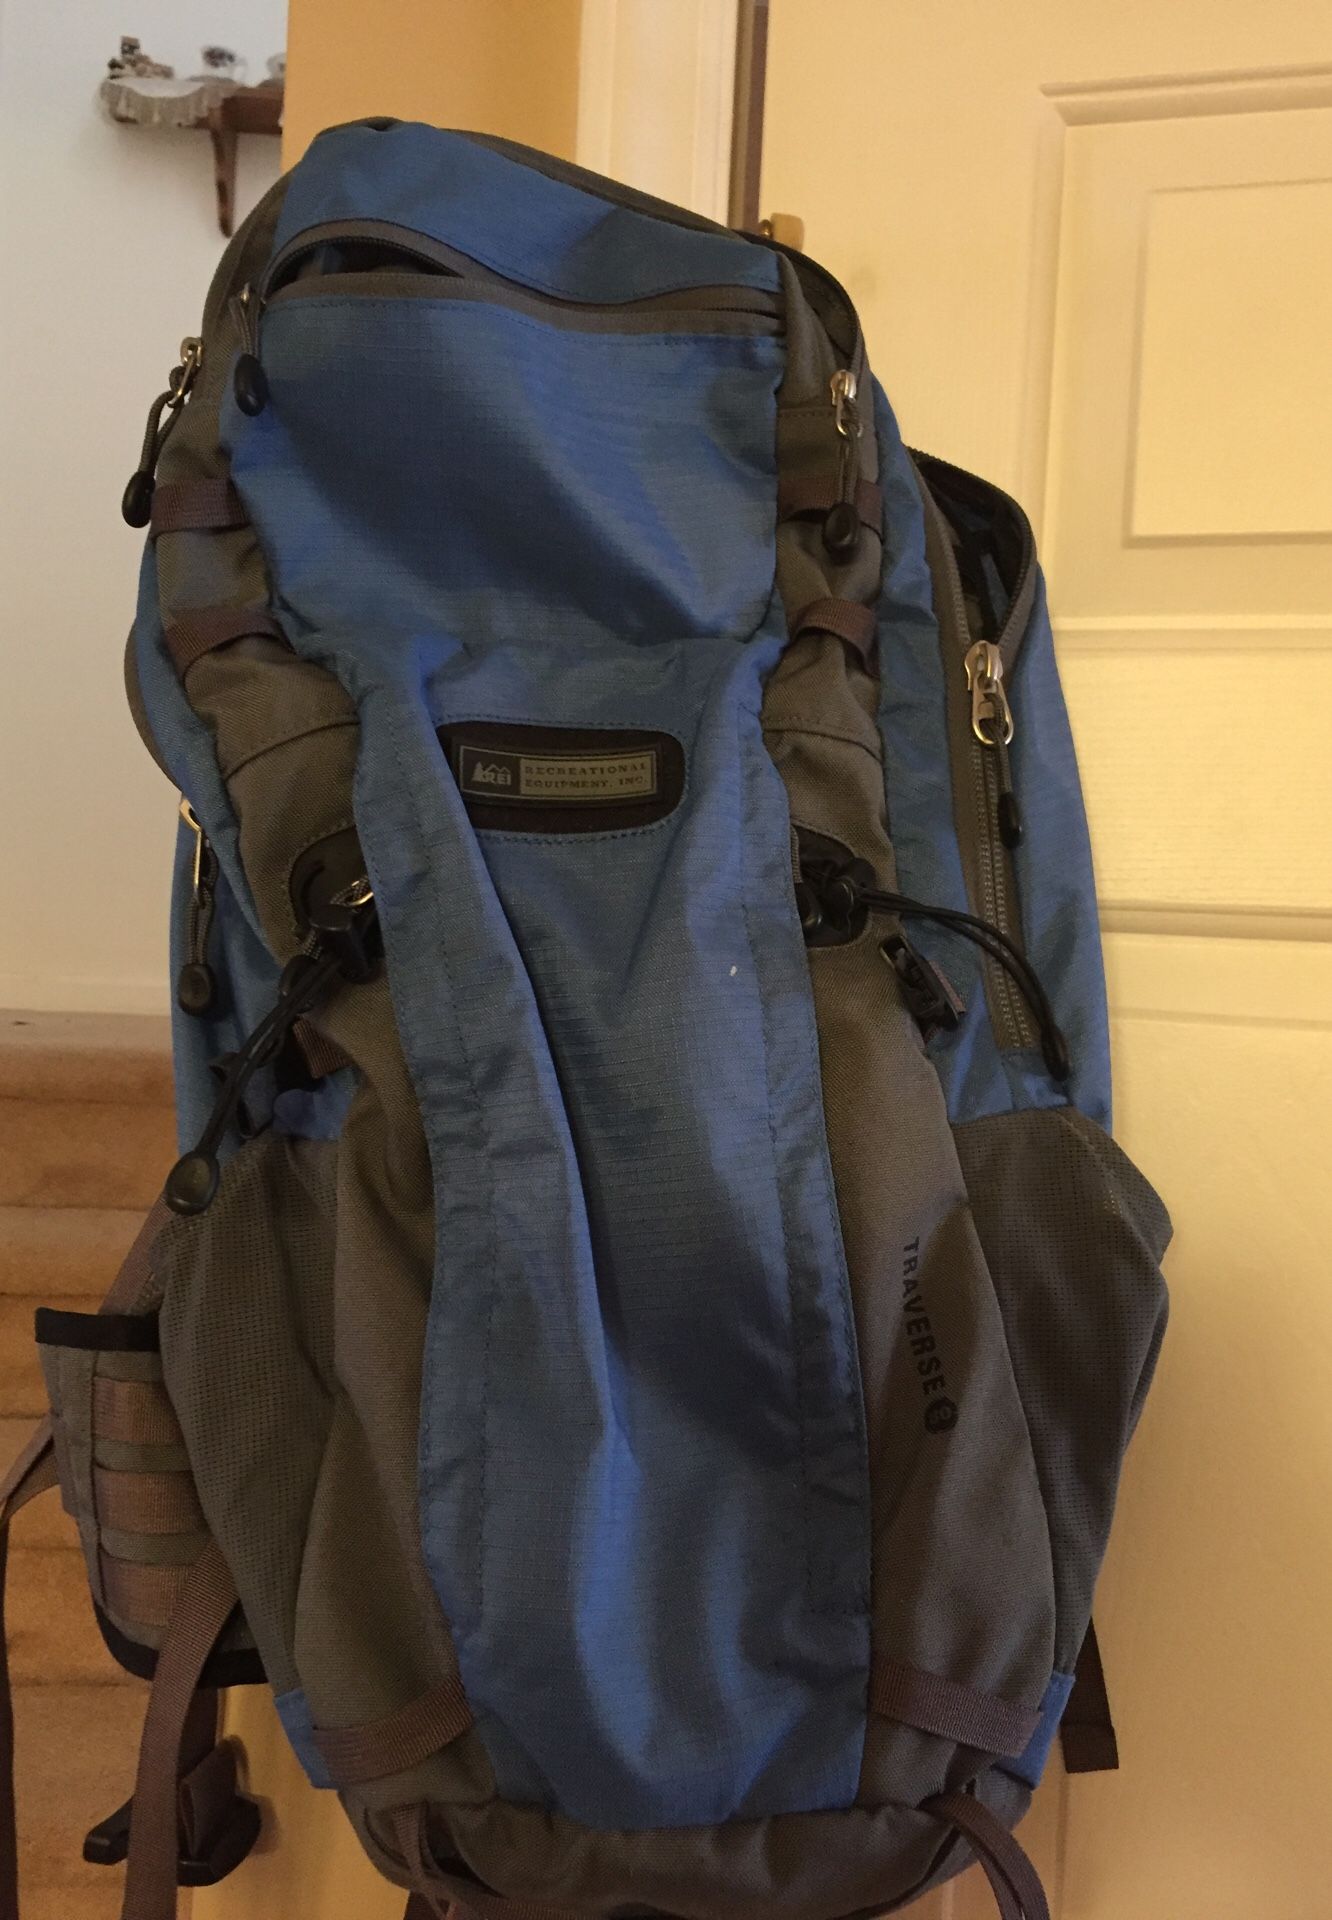 REI Traverse 30 backpack